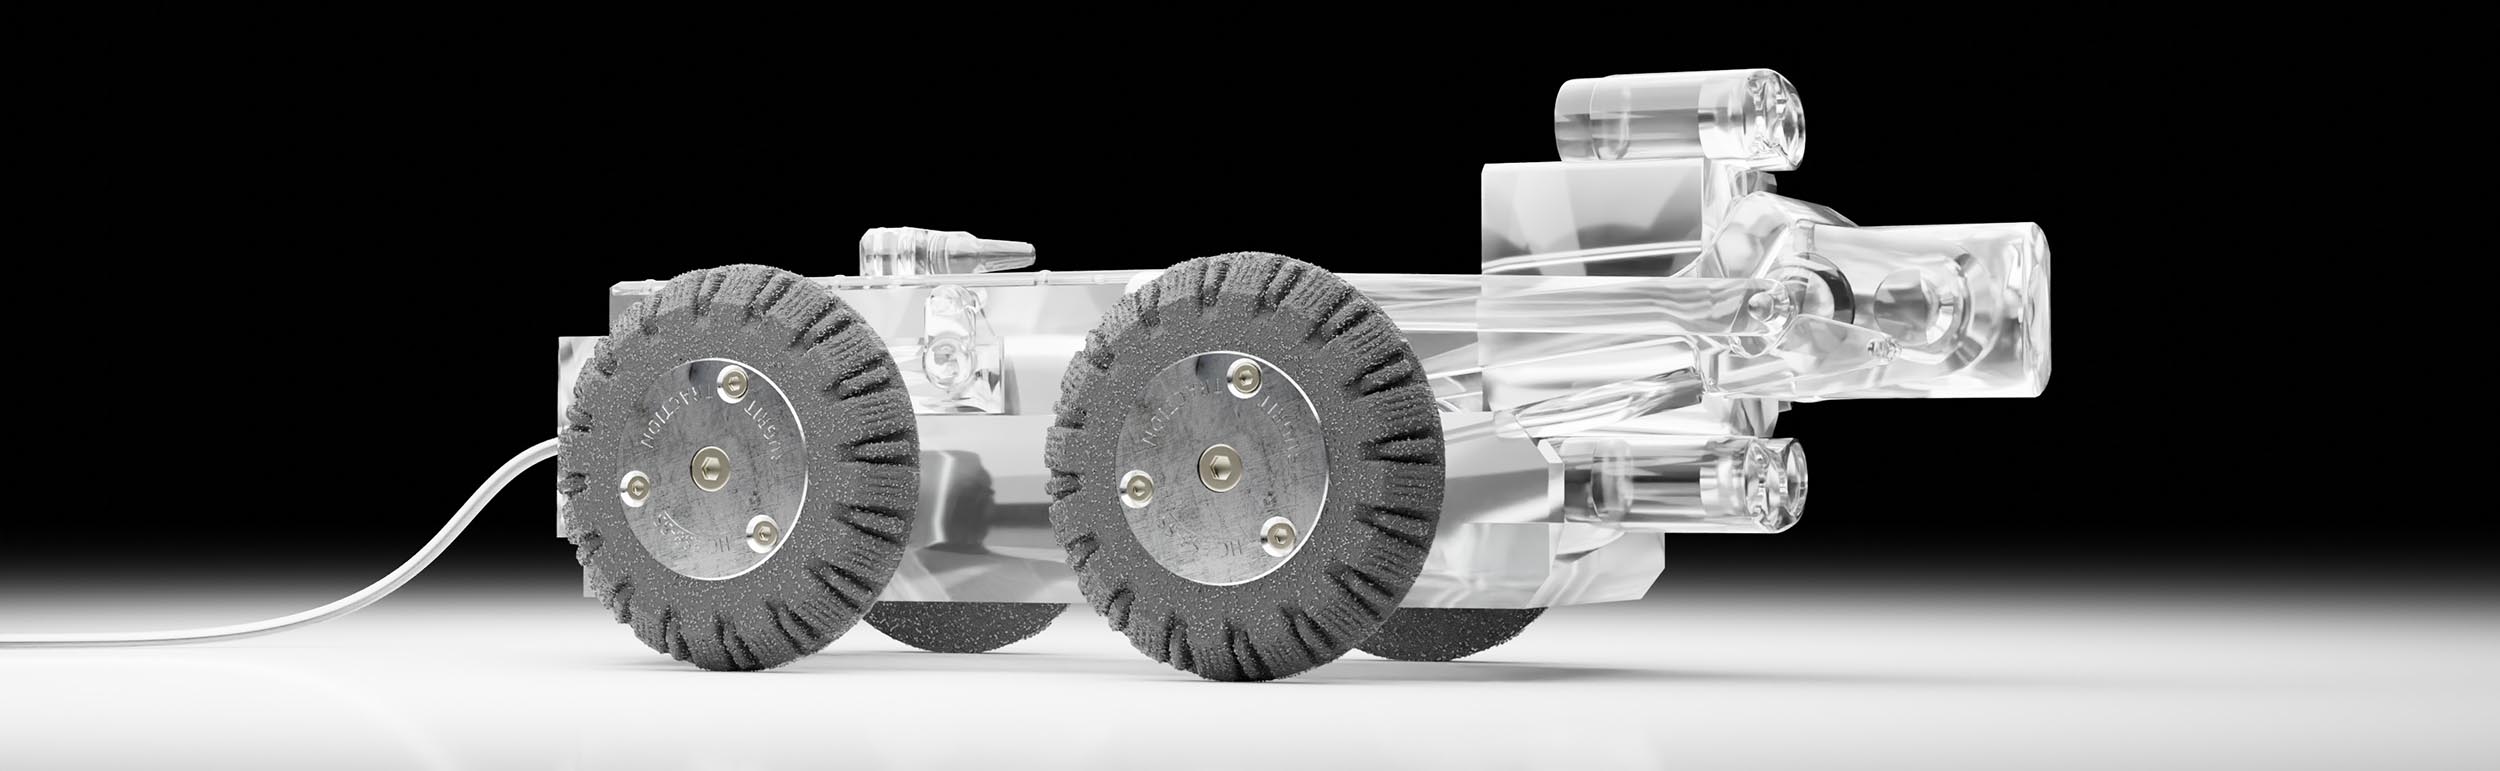 Sewer Camera Crawler with TruGrit Traction Wheels - Demonstrating reliable traction and maneuverability for sewer inspection